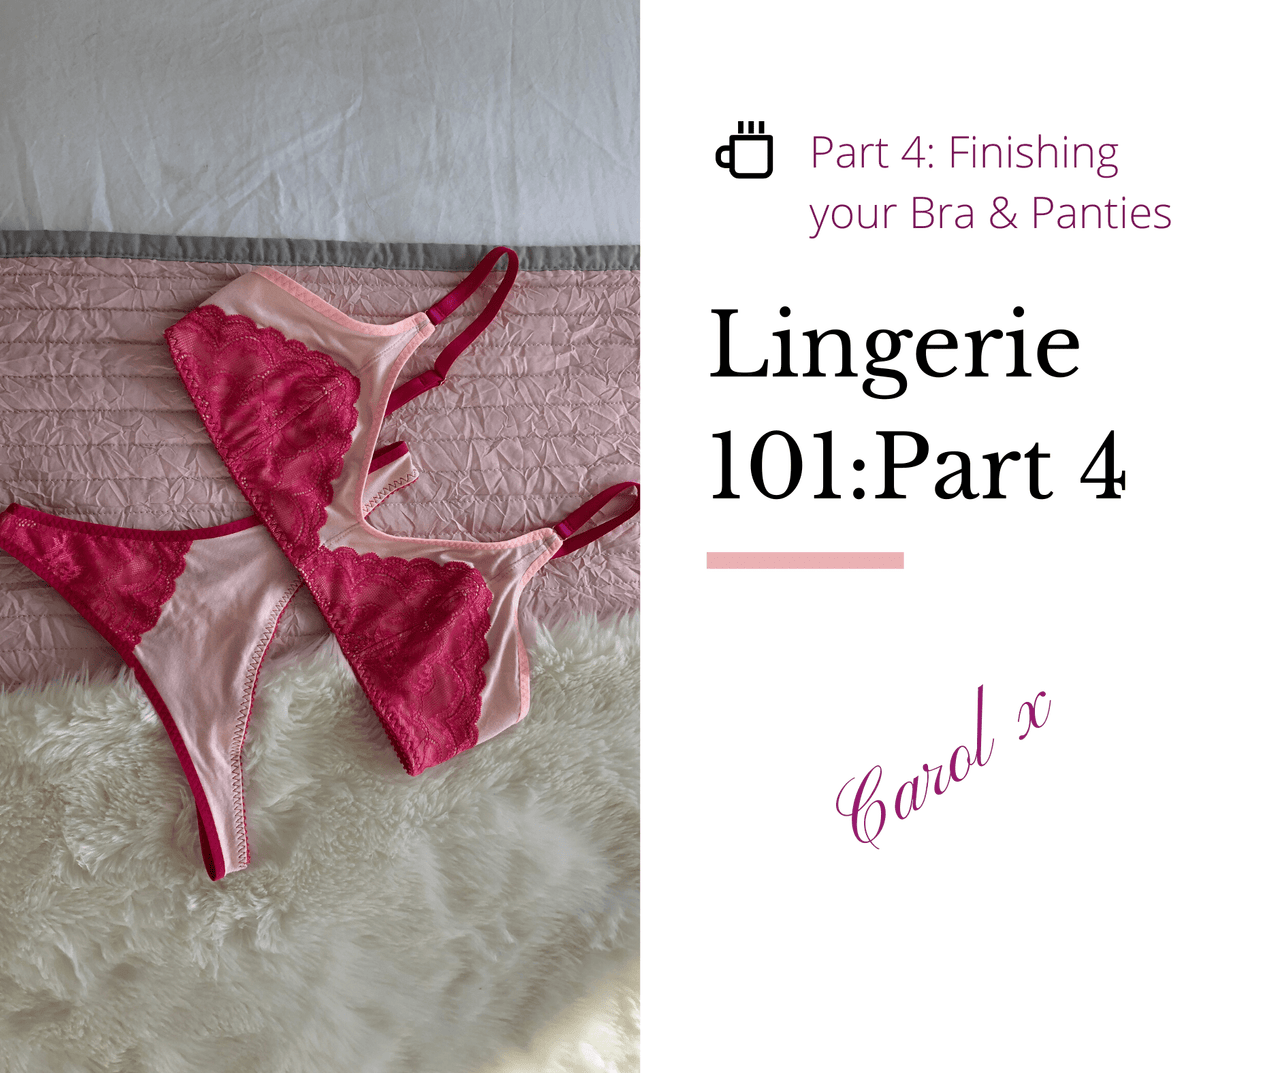 Lingerie 101 - Part 4: Finishing your Bra and Panties